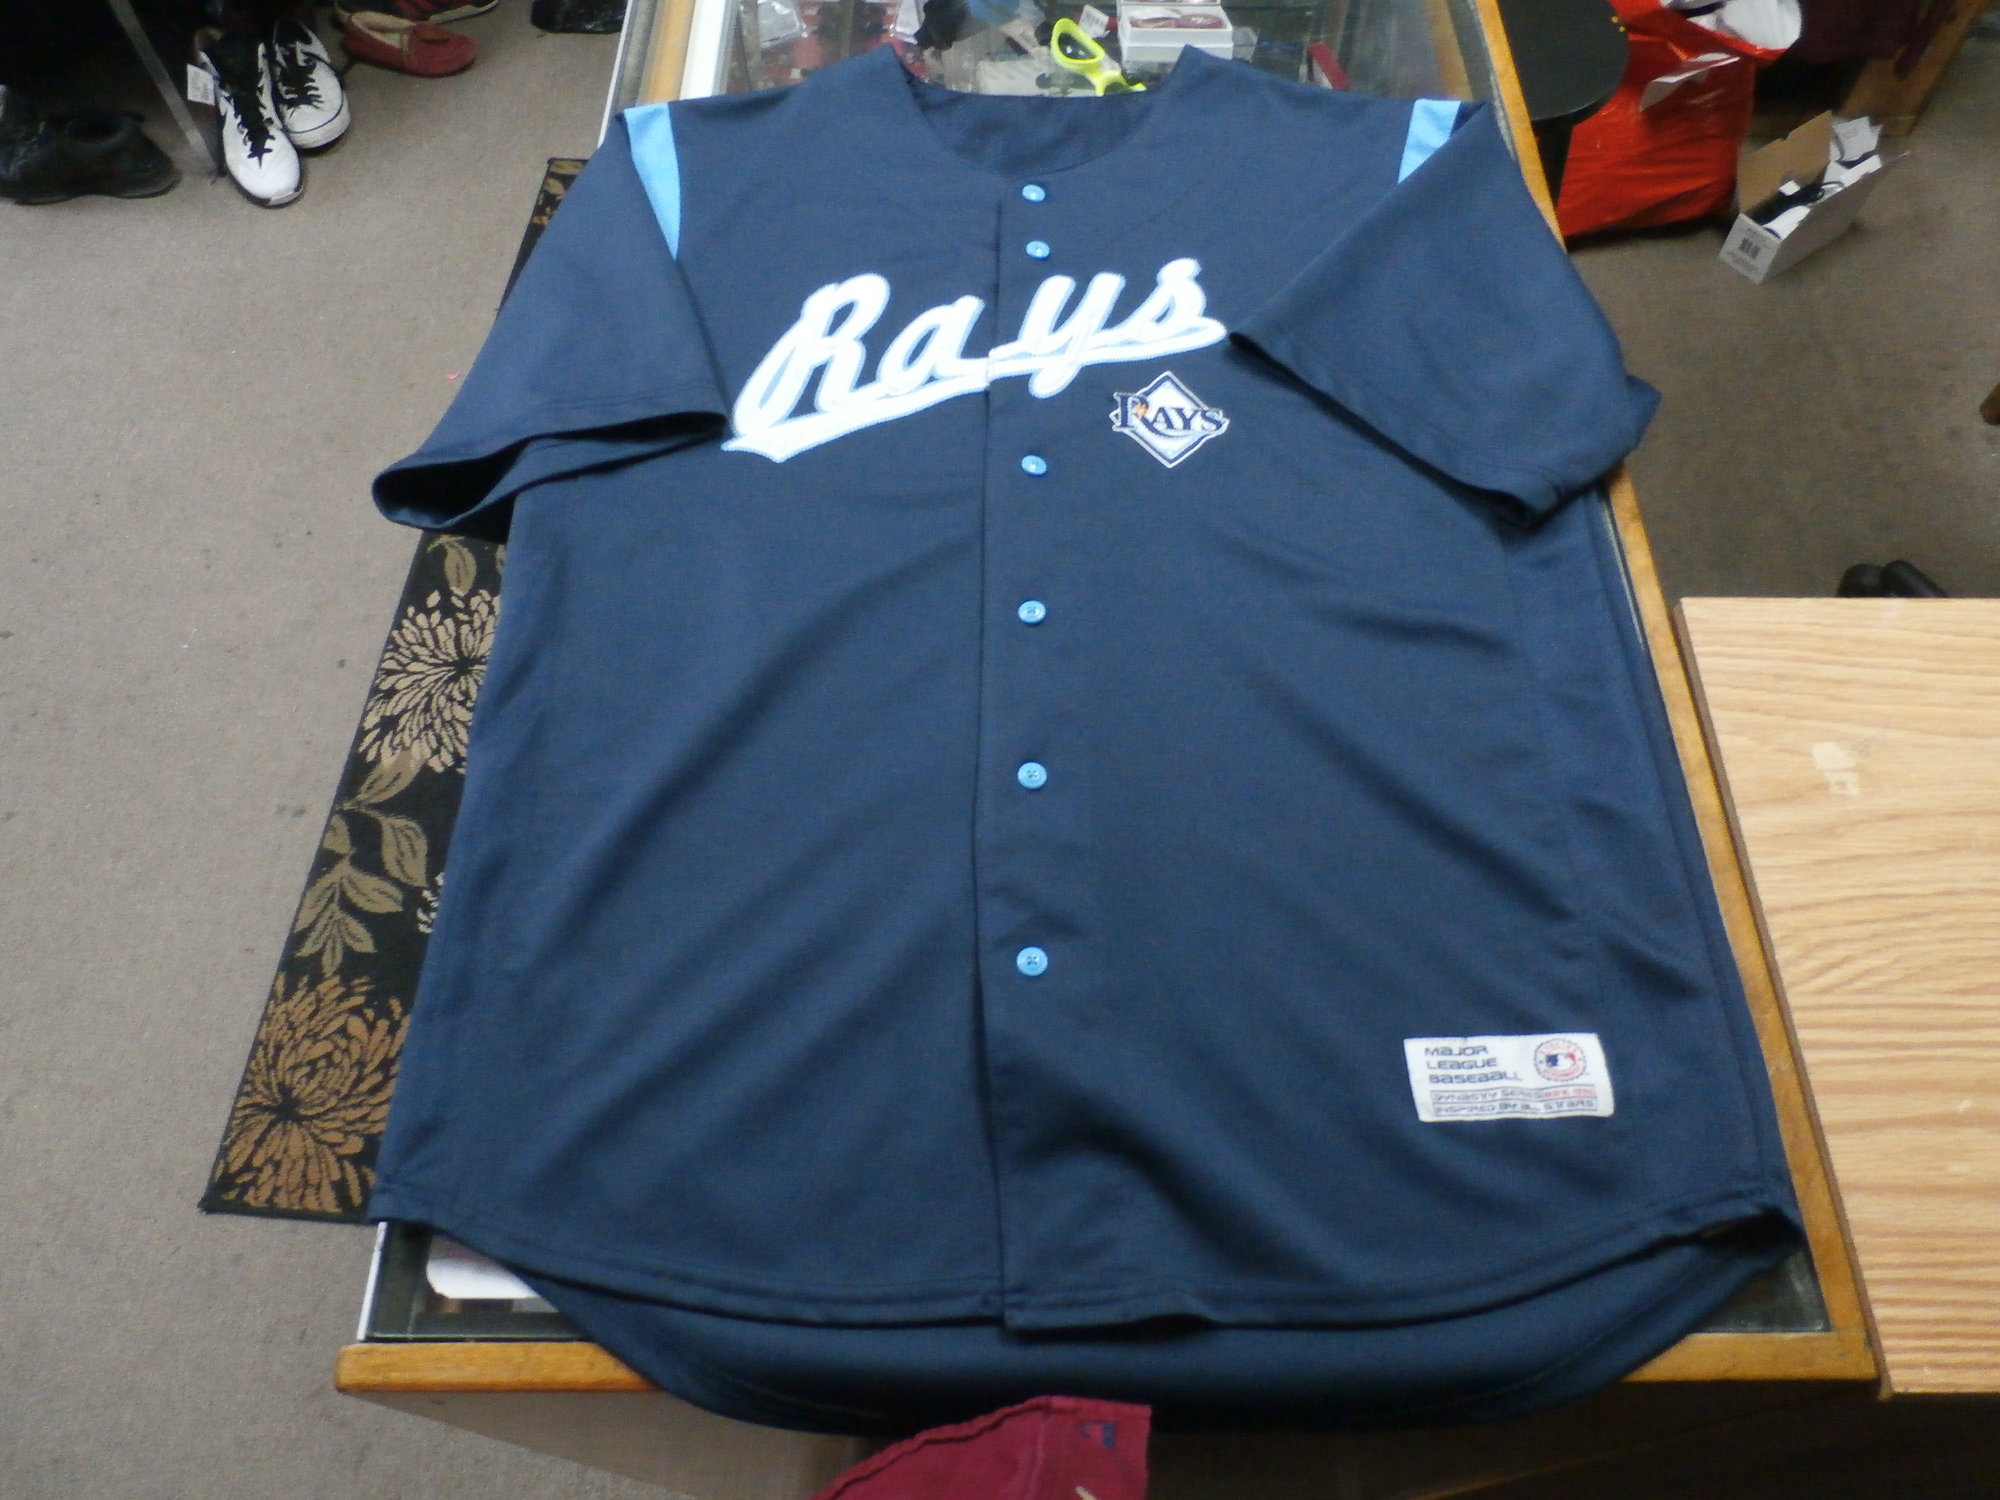 tampa bay rays jersey blue